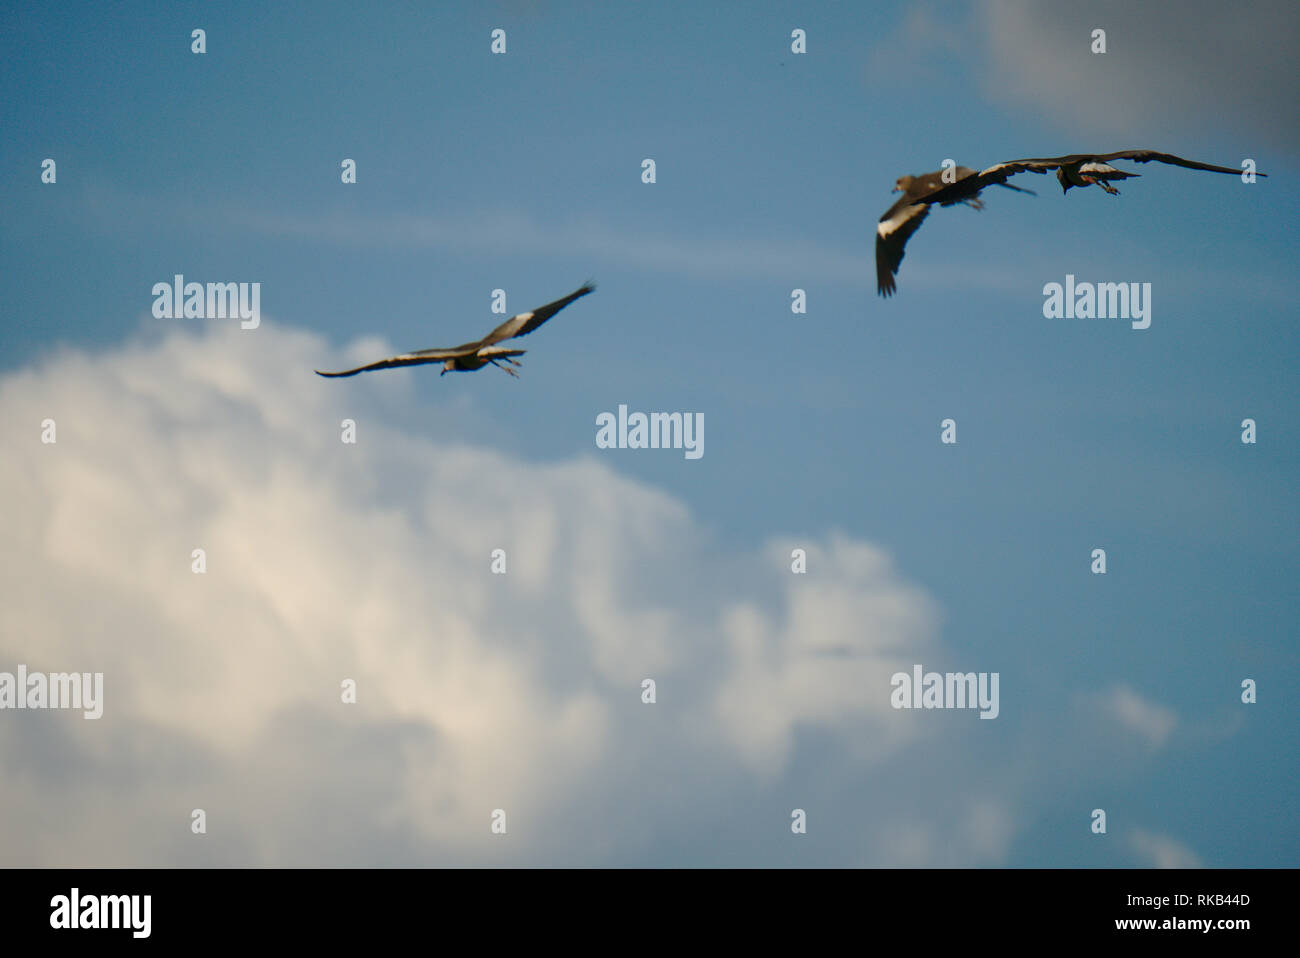 Some birds flying in the blue sky with clouds. Stock Photo